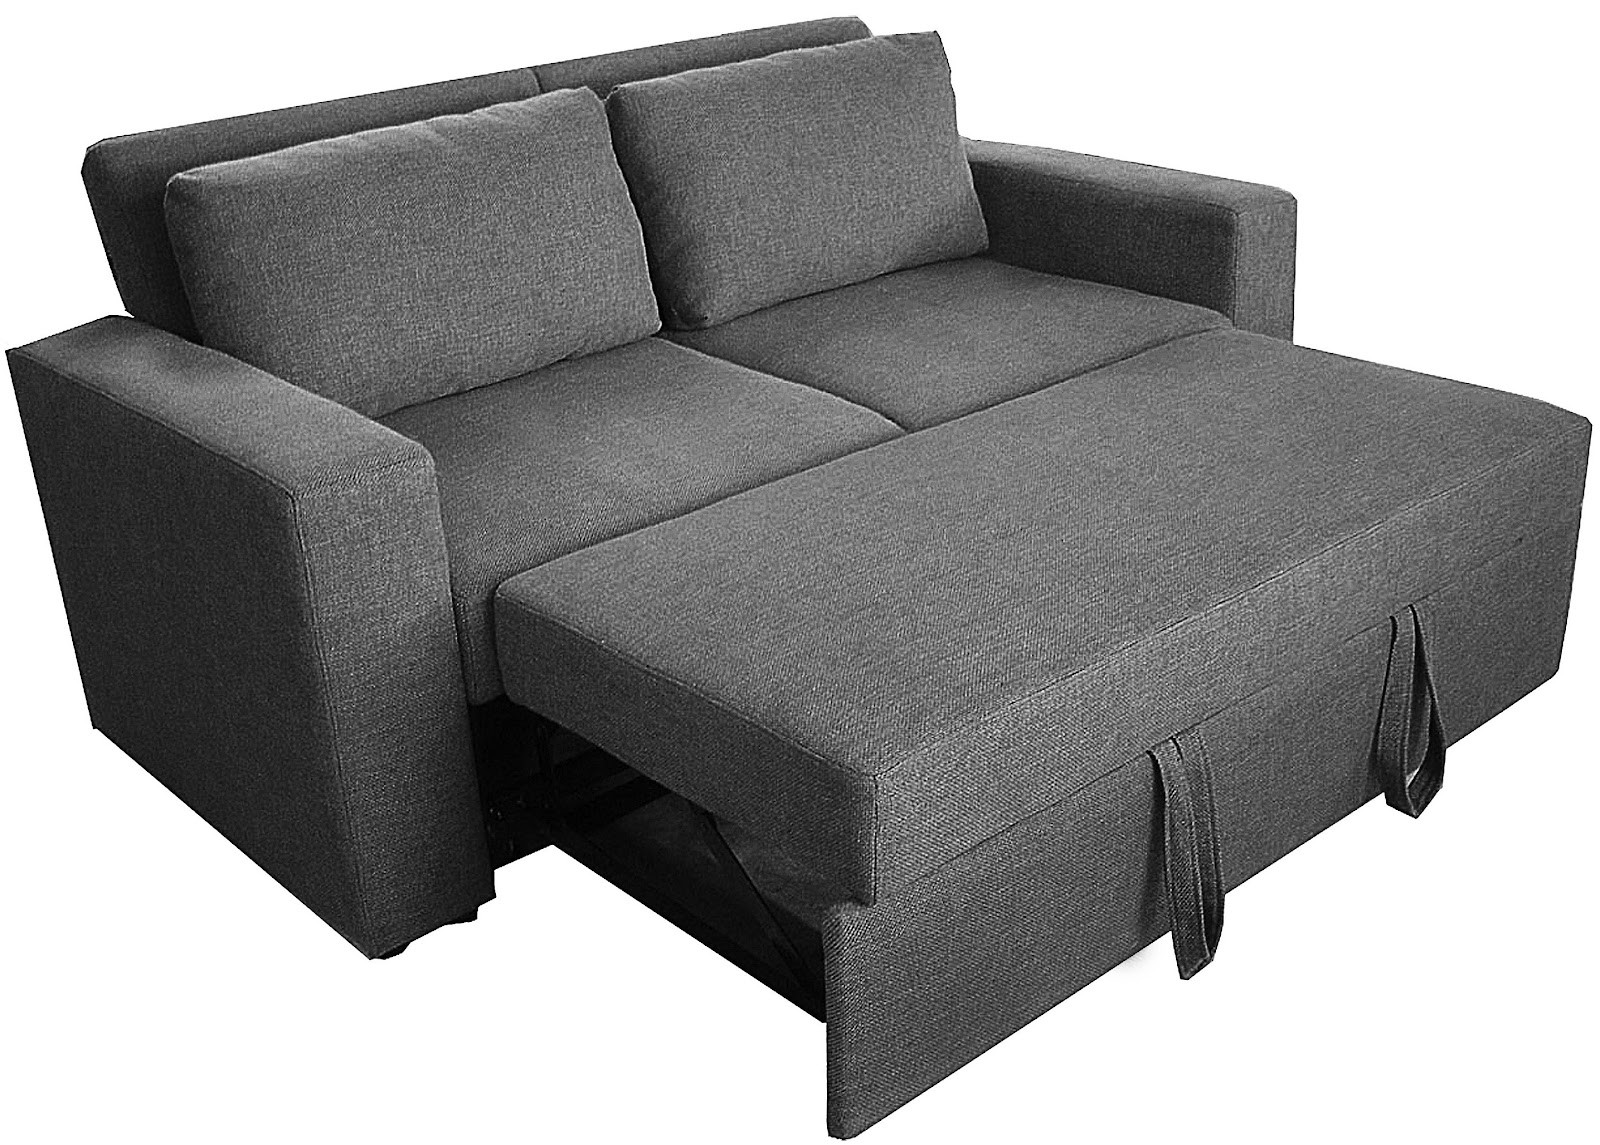 Couch bed ikea